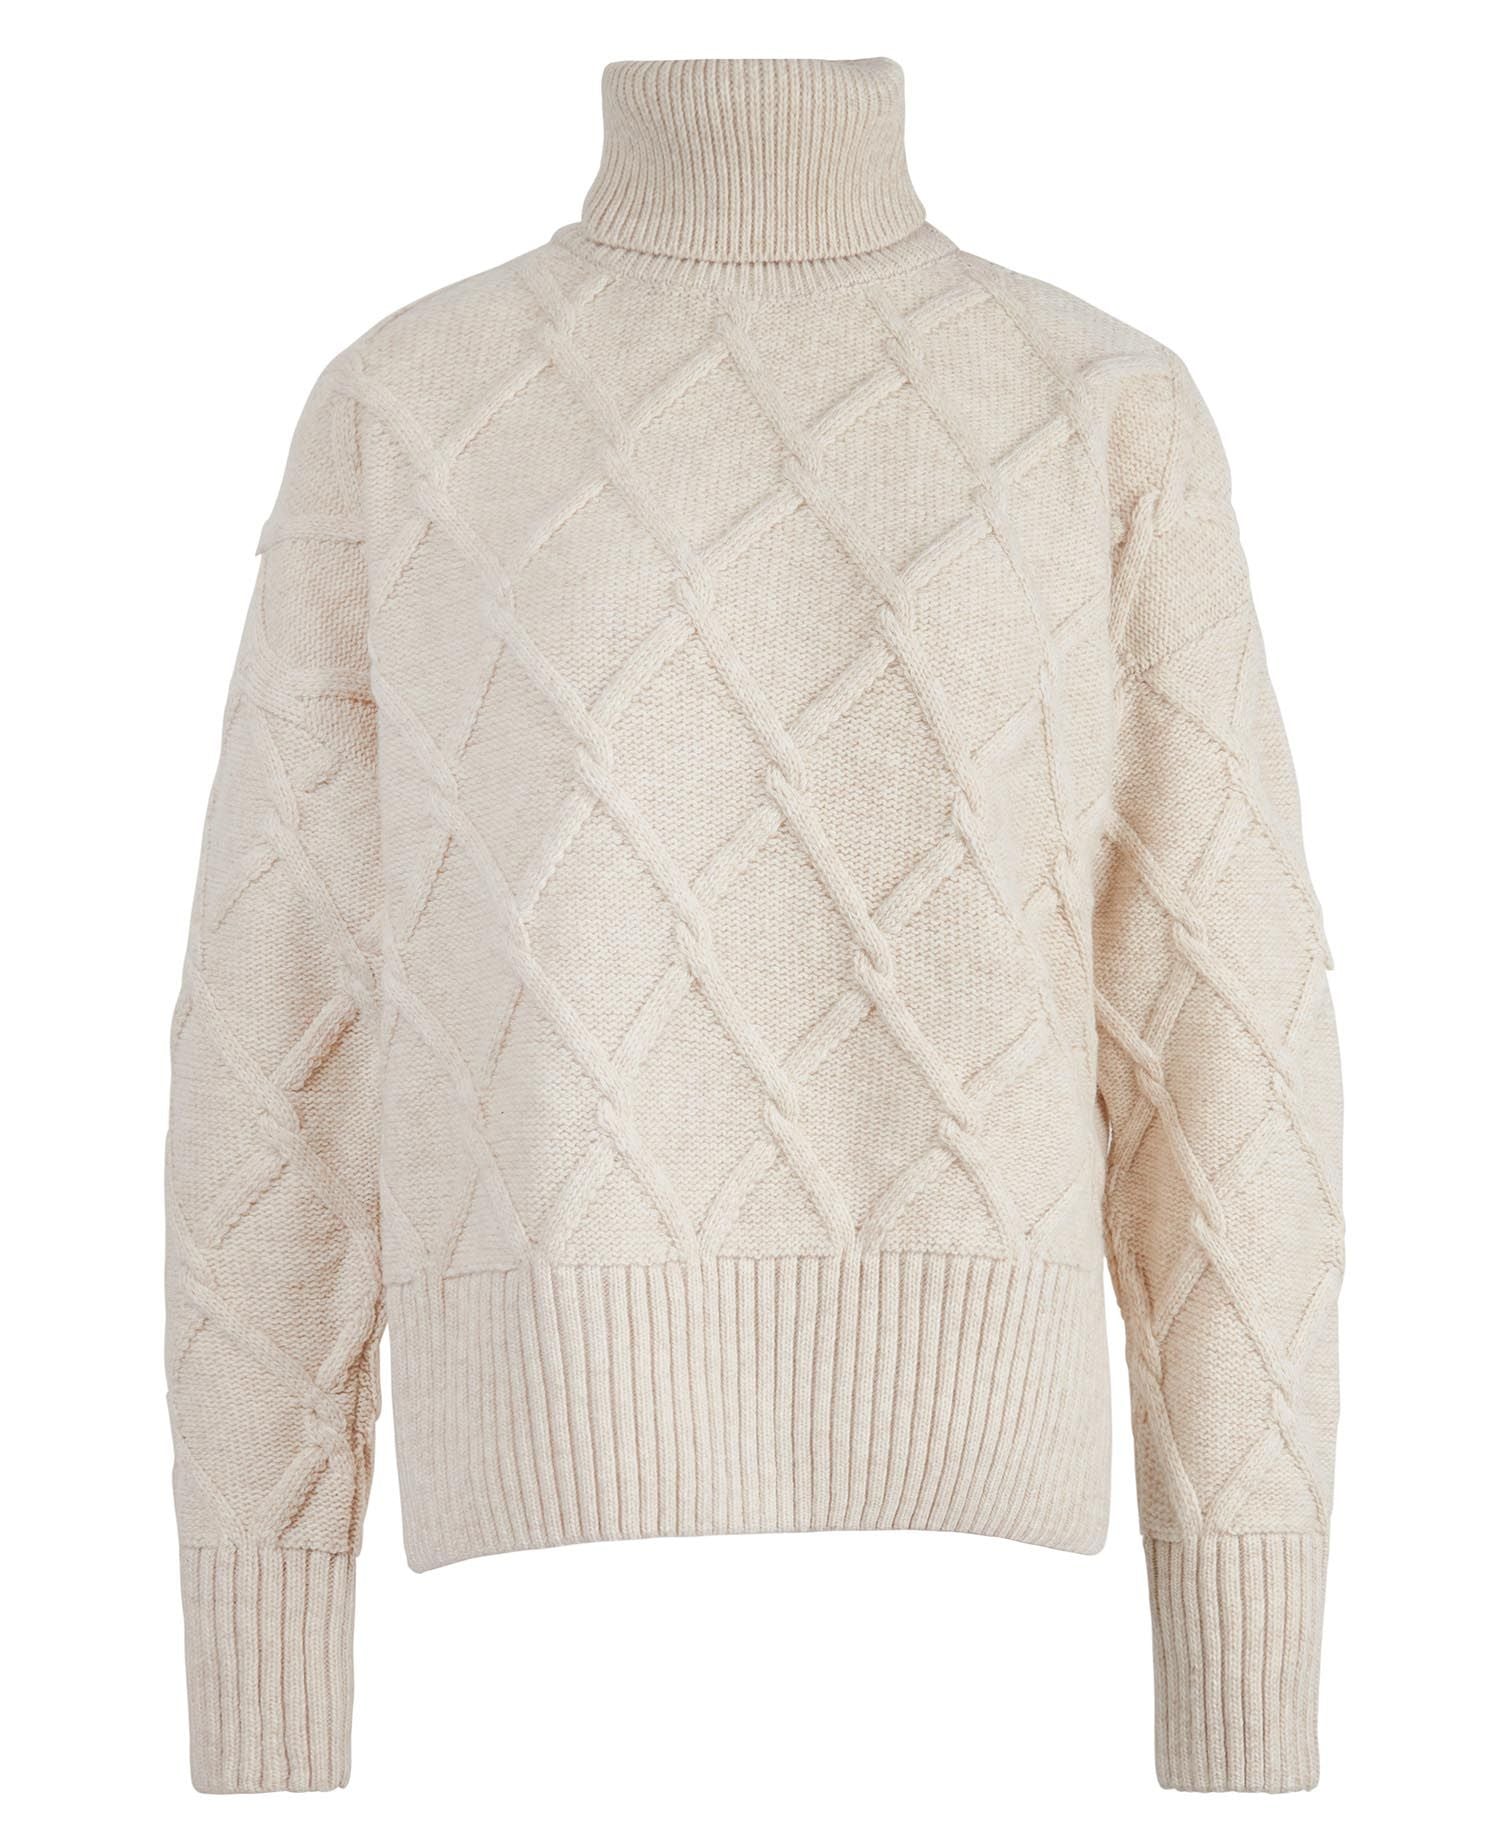 Perch Knitted Jumper - Oatmeal